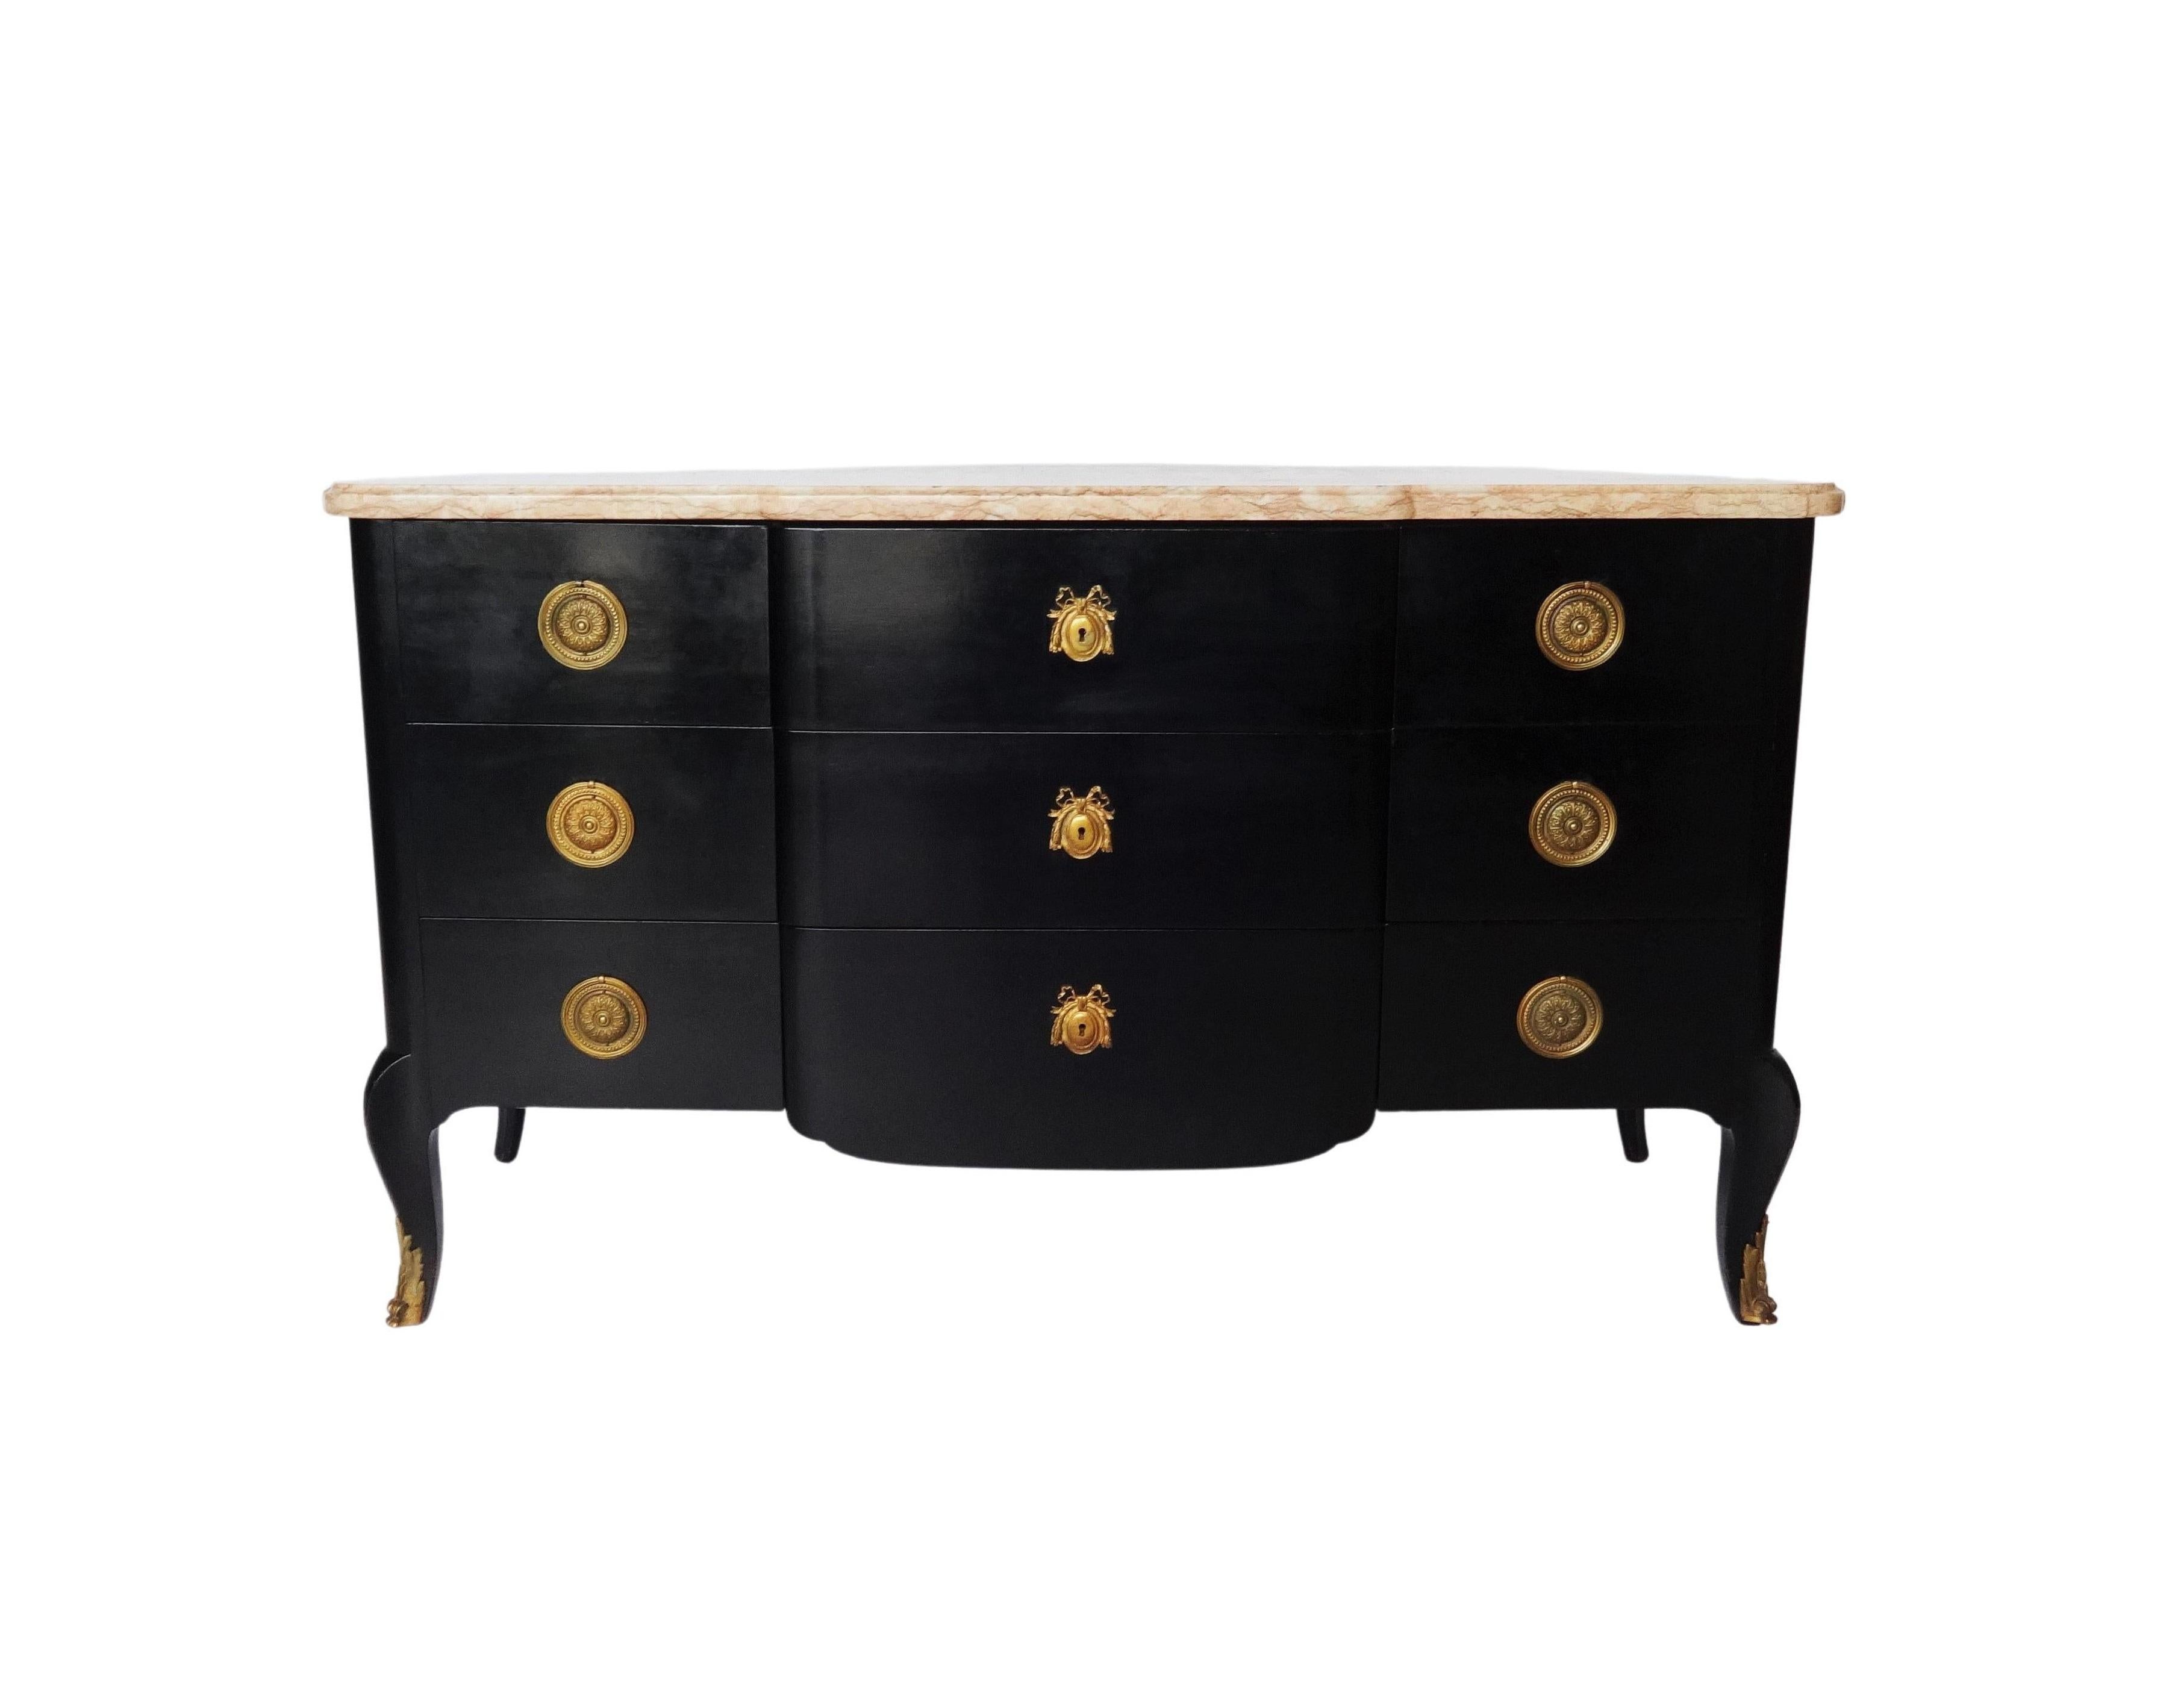 Antique French mahogany marble-top Louis XVI style commode has been ebonized and finished with a museum quality. This lovely piece features pink and grey veined marble-top. The chest has three large drawers in the middle and six small drawers on